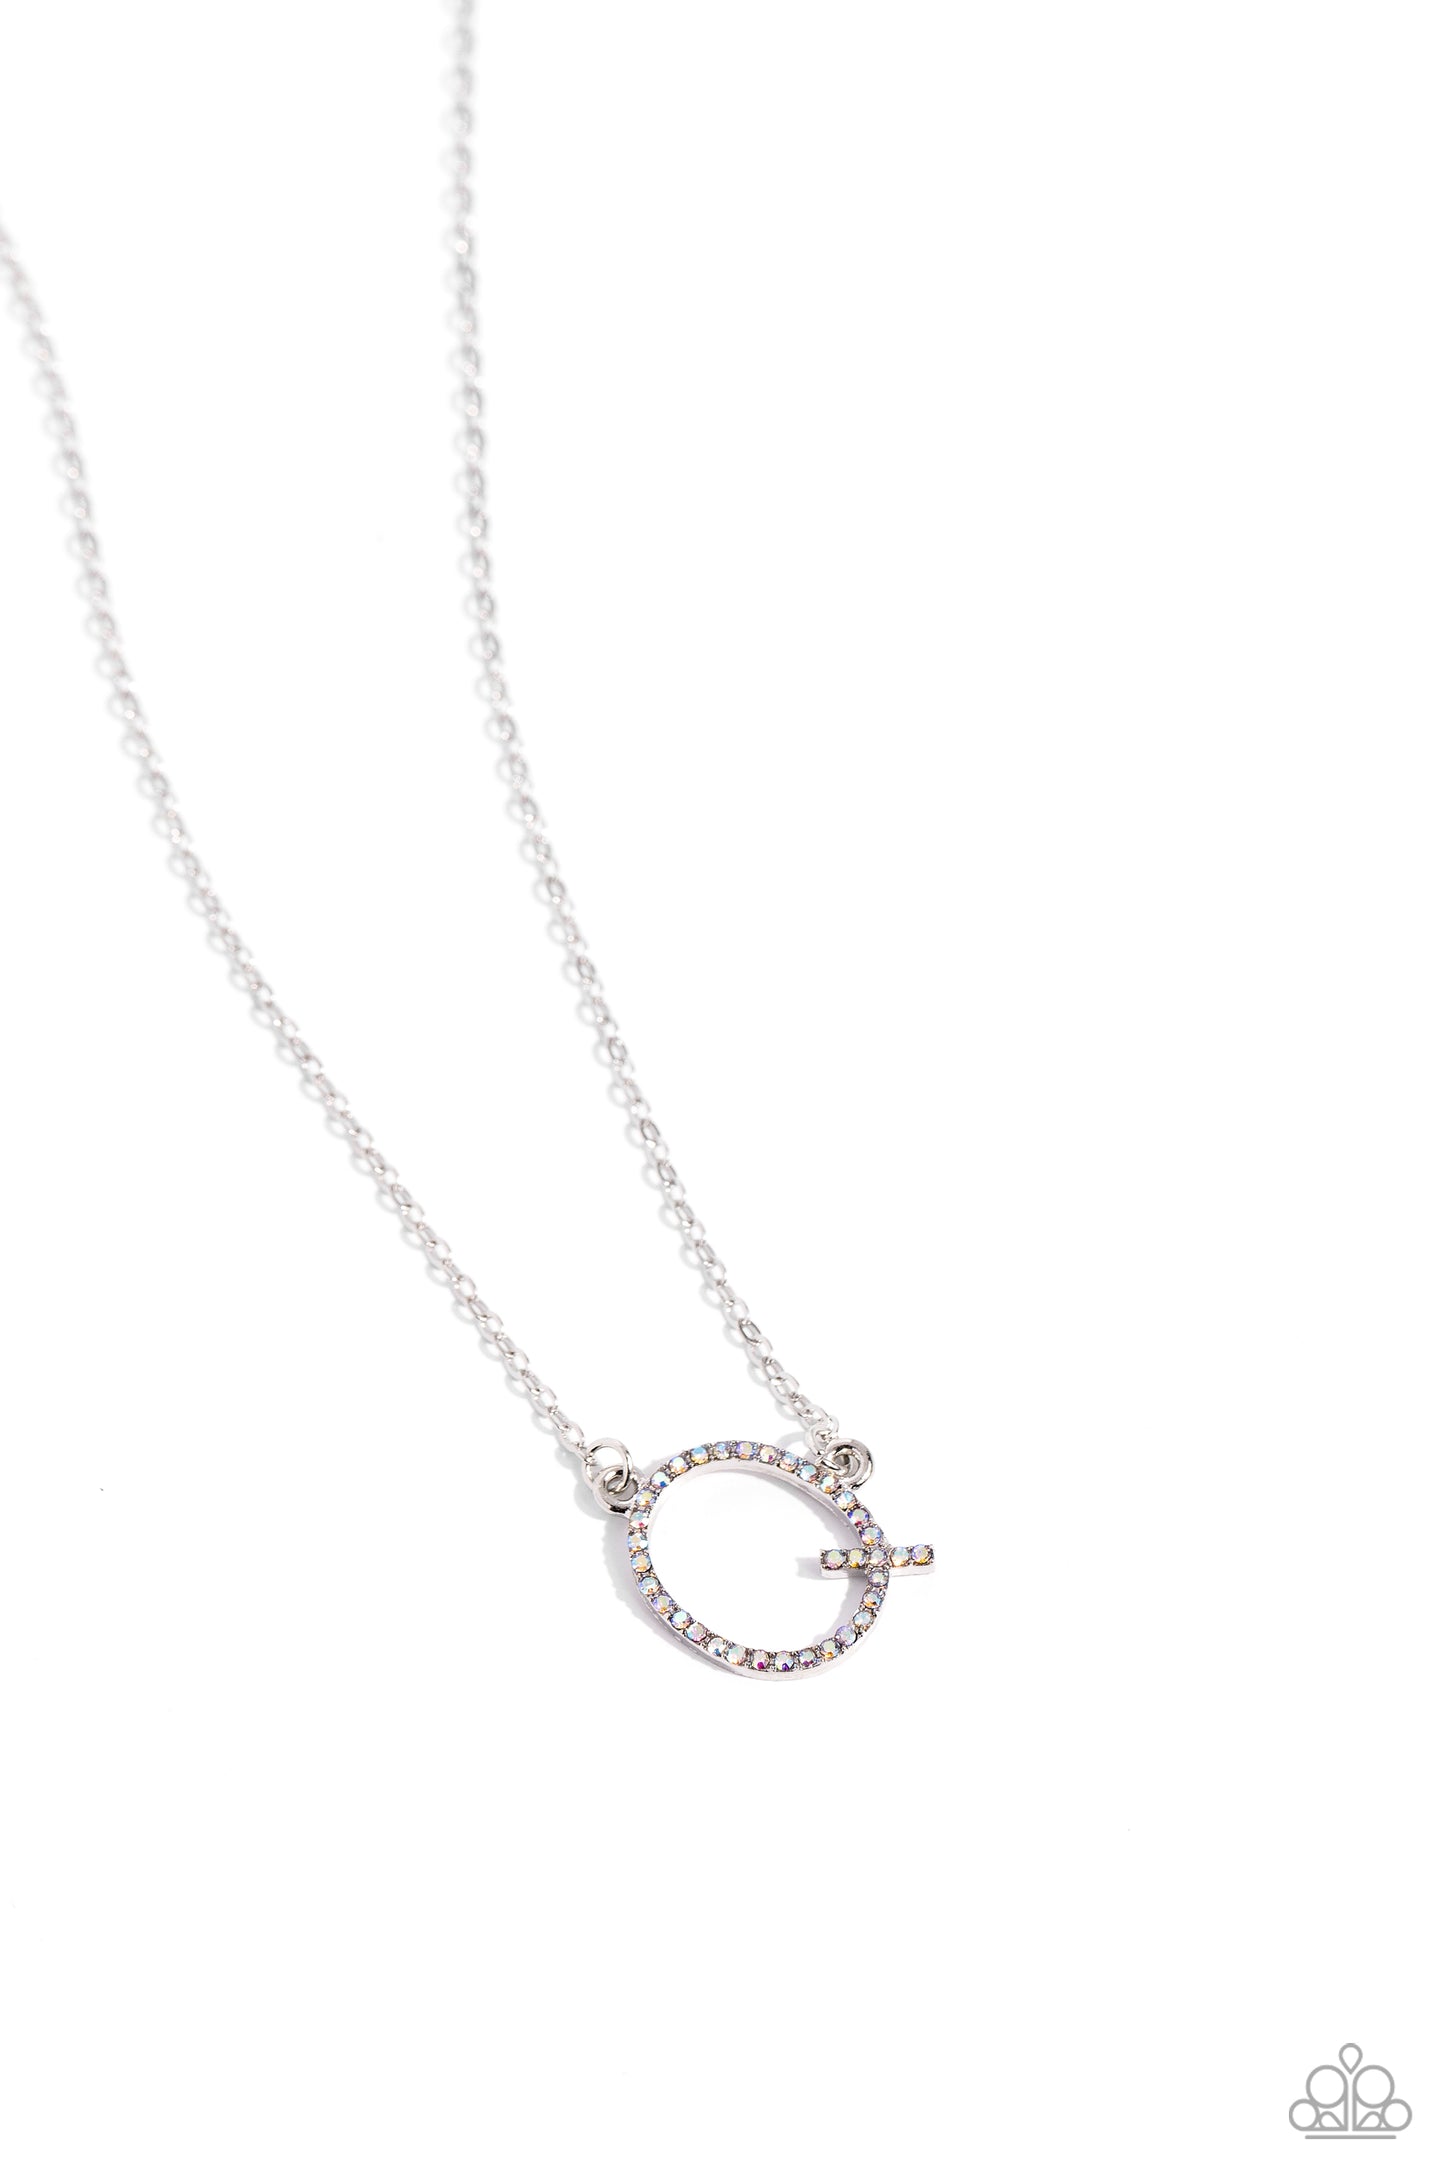 INITIALLY Yours Multi "Q" Necklace - Paparazzi Accessories  Embossed with dainty iridescent rhinestones, a silver letter "Q" hovers below the collar from a dainty silver chain, for a sentimentally simple design. Features an adjustable clasp closure. Due to its prismatic palette, color may vary.  Sold as one individual necklace. Includes one pair of matching earrings.